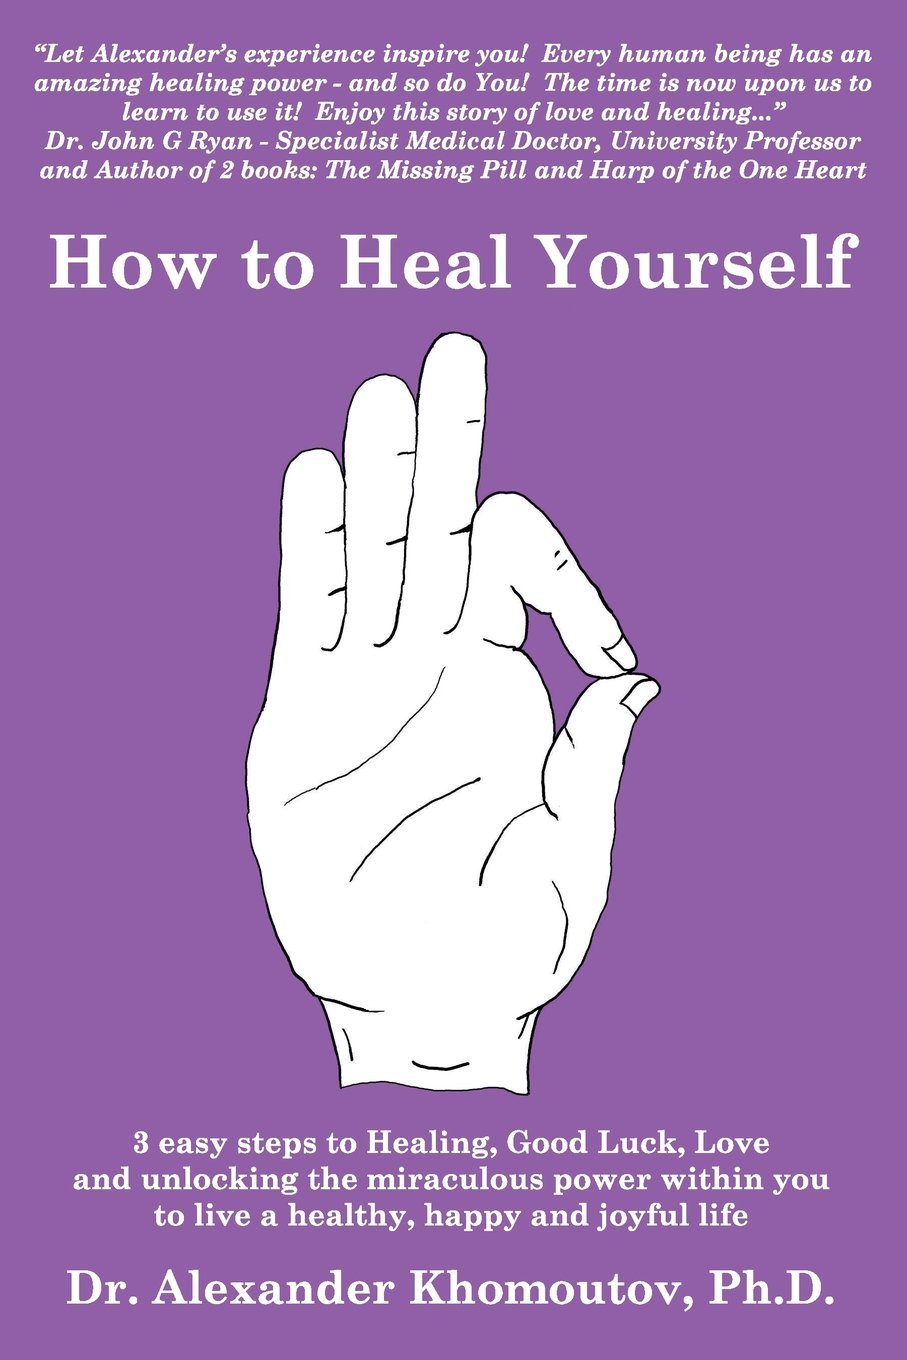  3 easy steps to Healing, Good Luck, Love and unlocking the miraculous power within you to live a healthy, happy and joyful life - book back cover